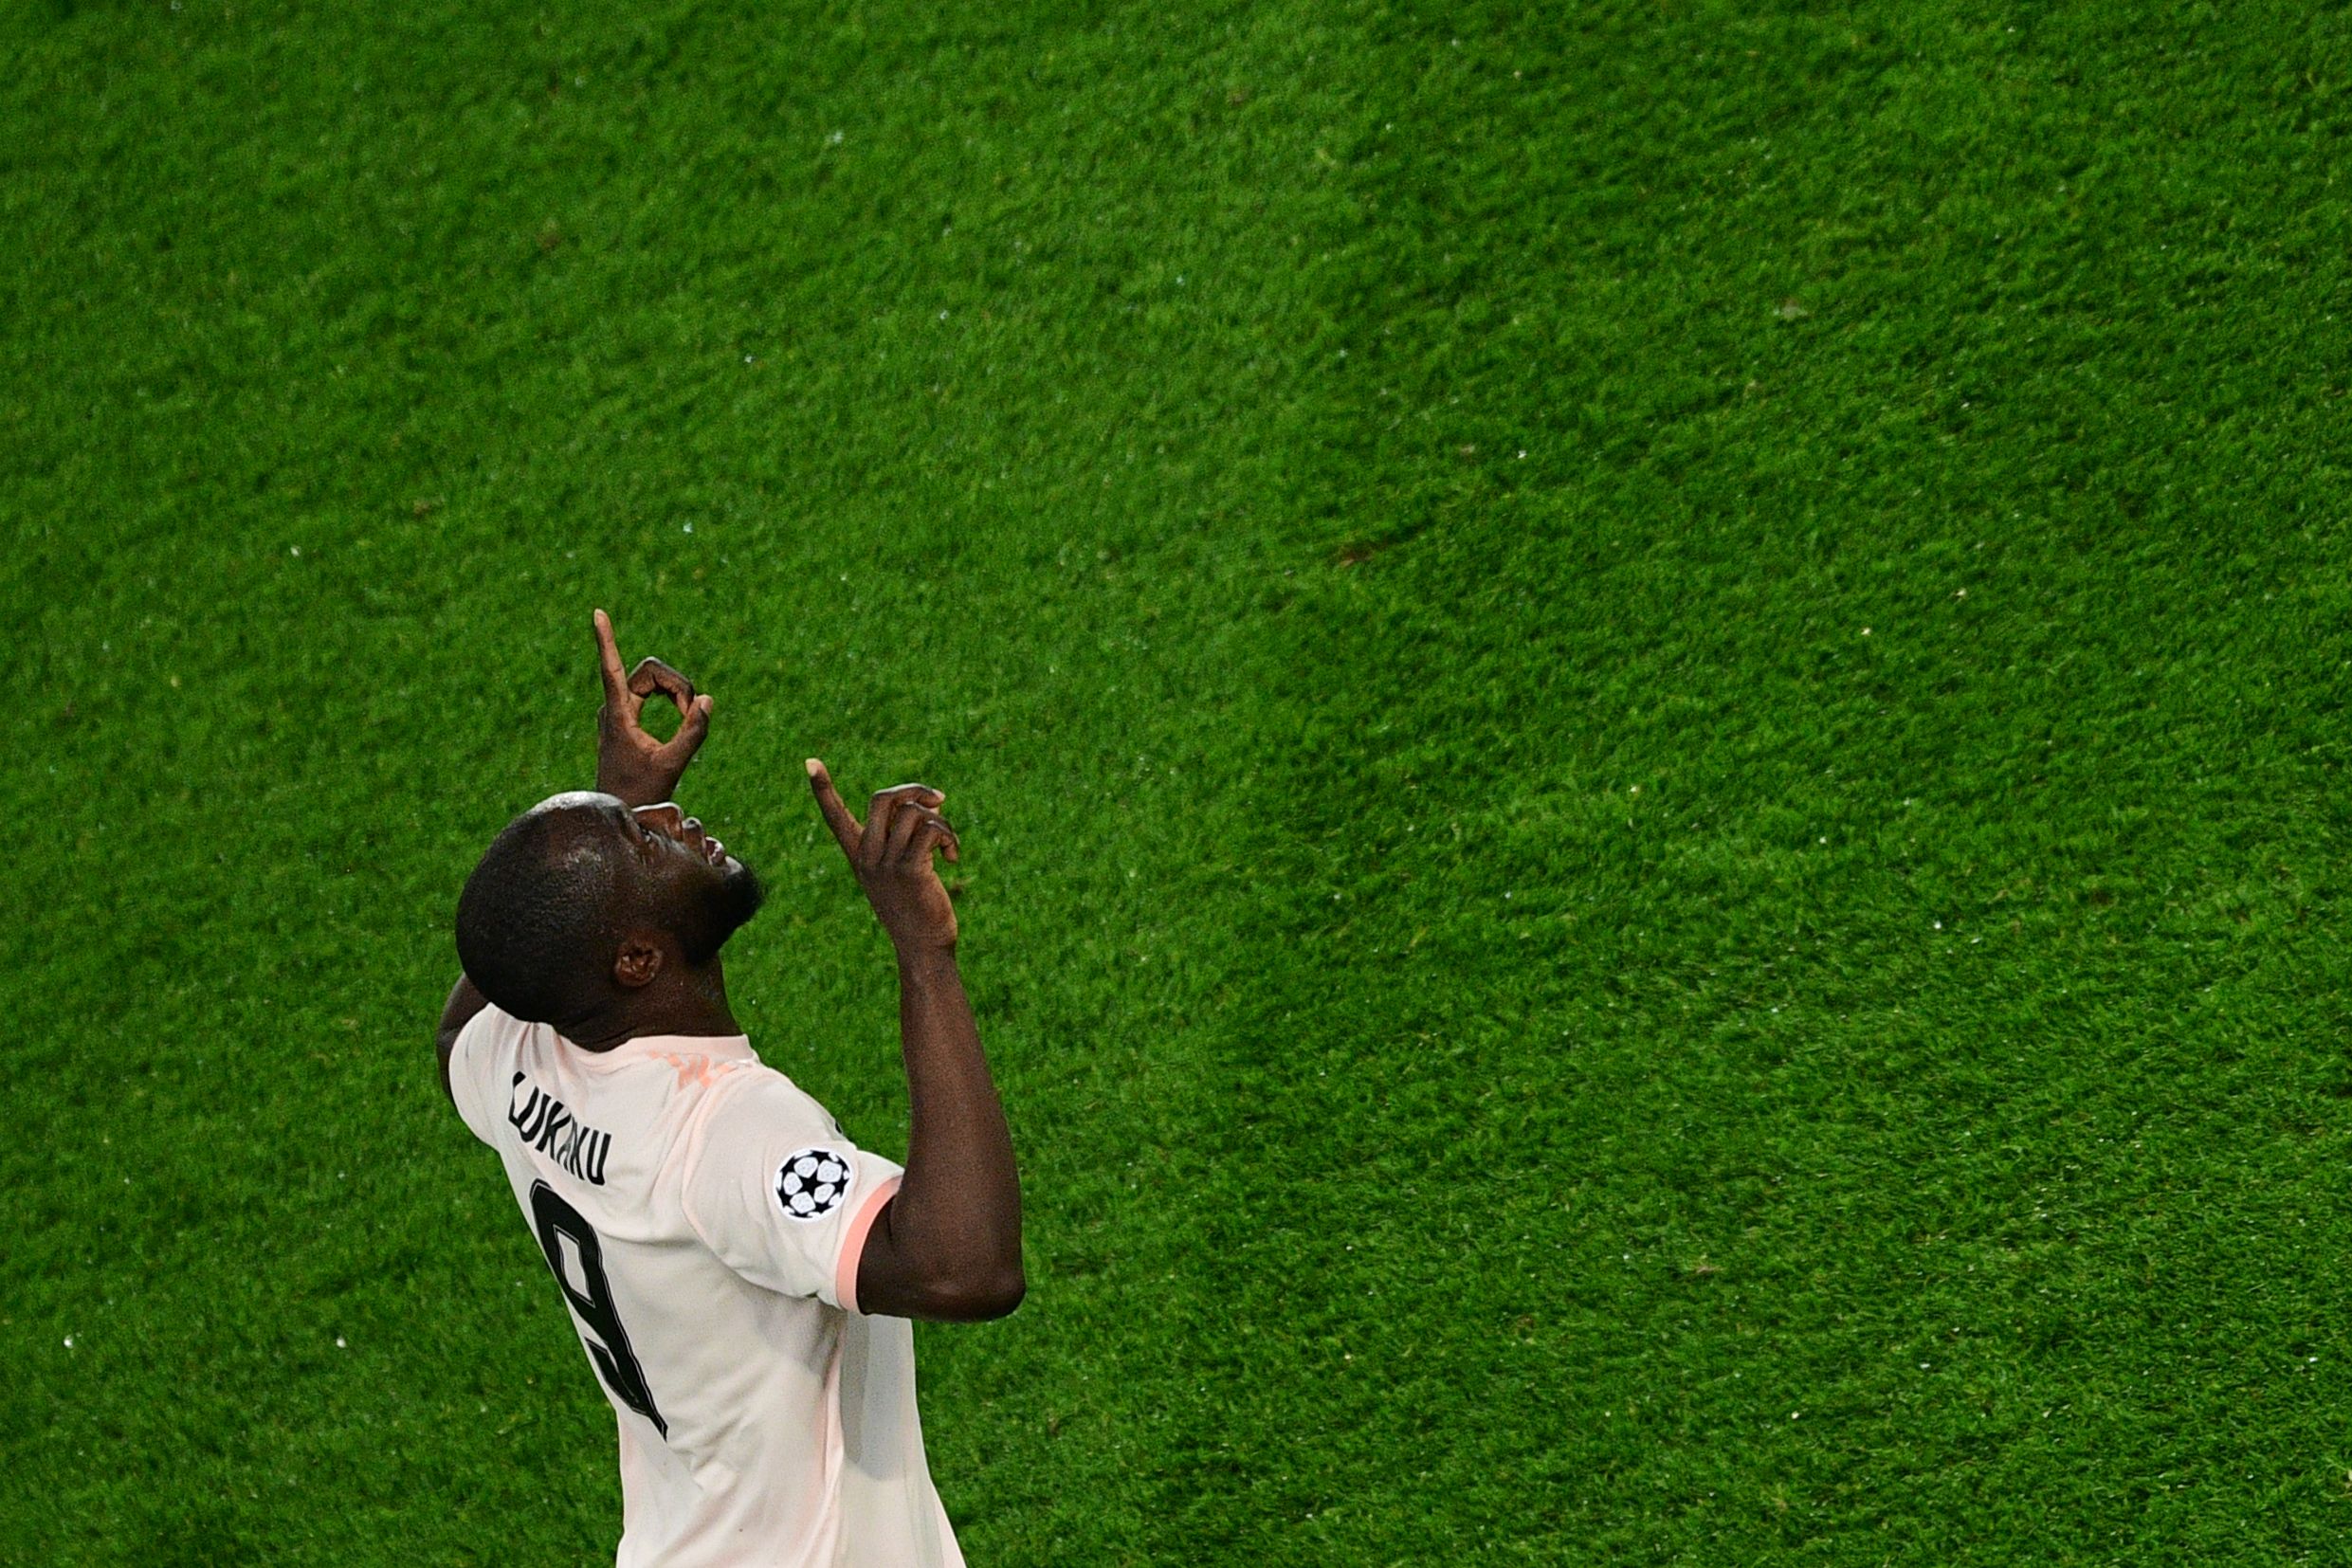 TOPSHOT - Manchester United's Belgian forward Romelu Lukaku celebrates after scoring his team's second goal during the UEFA Champions League round of 16 second-leg football match between Paris Saint-Germain (PSG) and Manchester United at the Parc des Princes stadium in Paris on March 6, 2019. (Photo by Martin BUREAU / AFP)        (Photo credit should read MARTIN BUREAU/AFP/Getty Images)